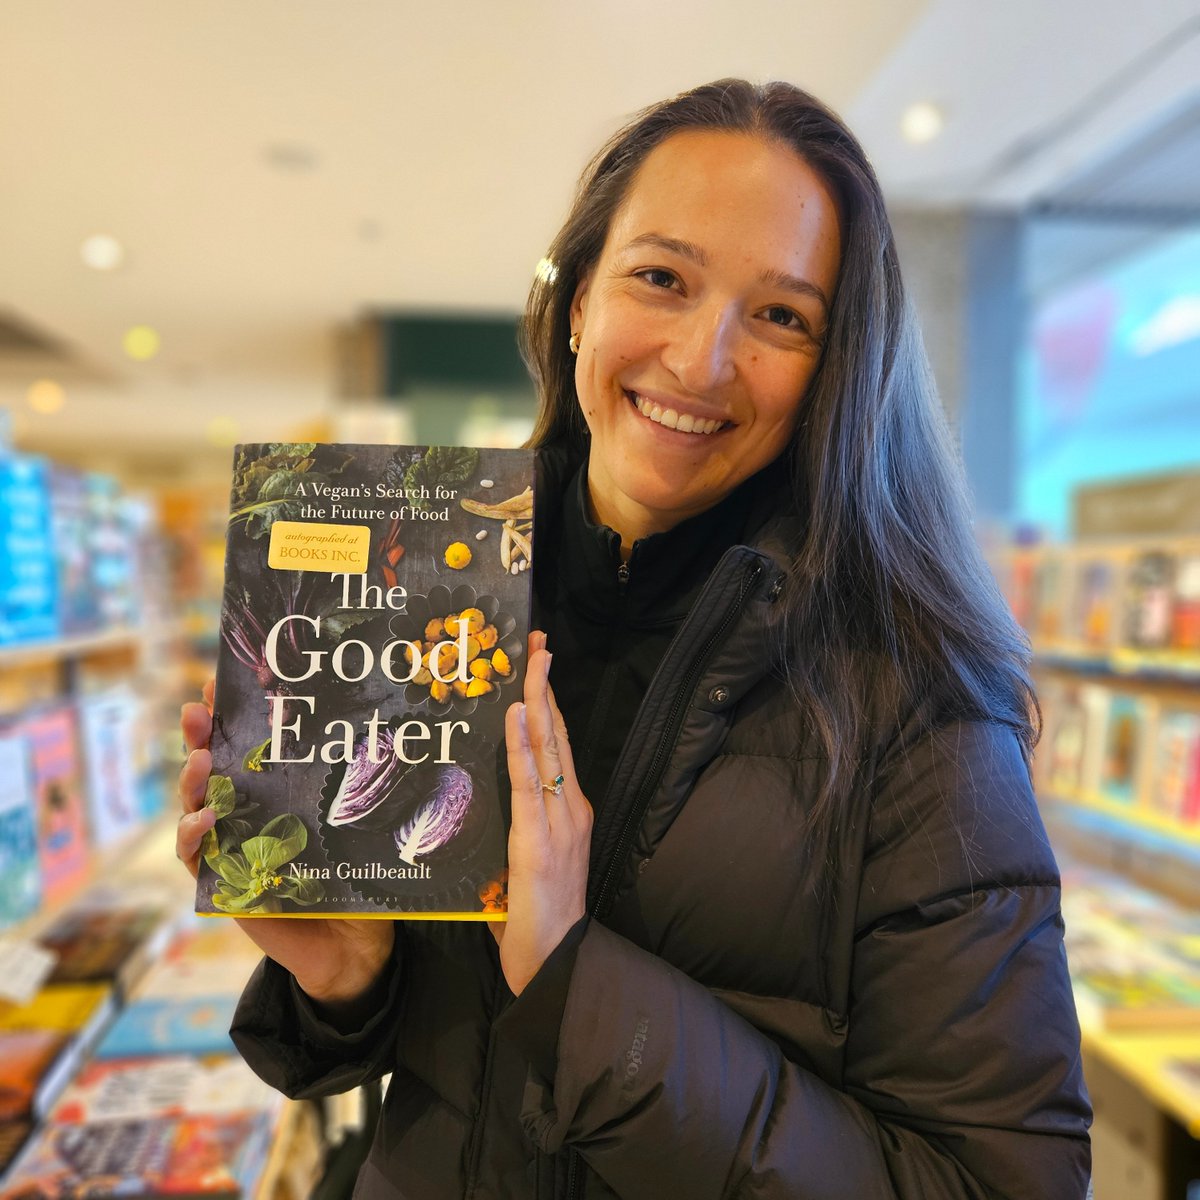 #NinaGuilbeault stopped at our Terminal 2 store to sign #TheGoodEater on her way to recording the audiobook for it. Read this if you are interested in the future of food! #NewBookTuesday